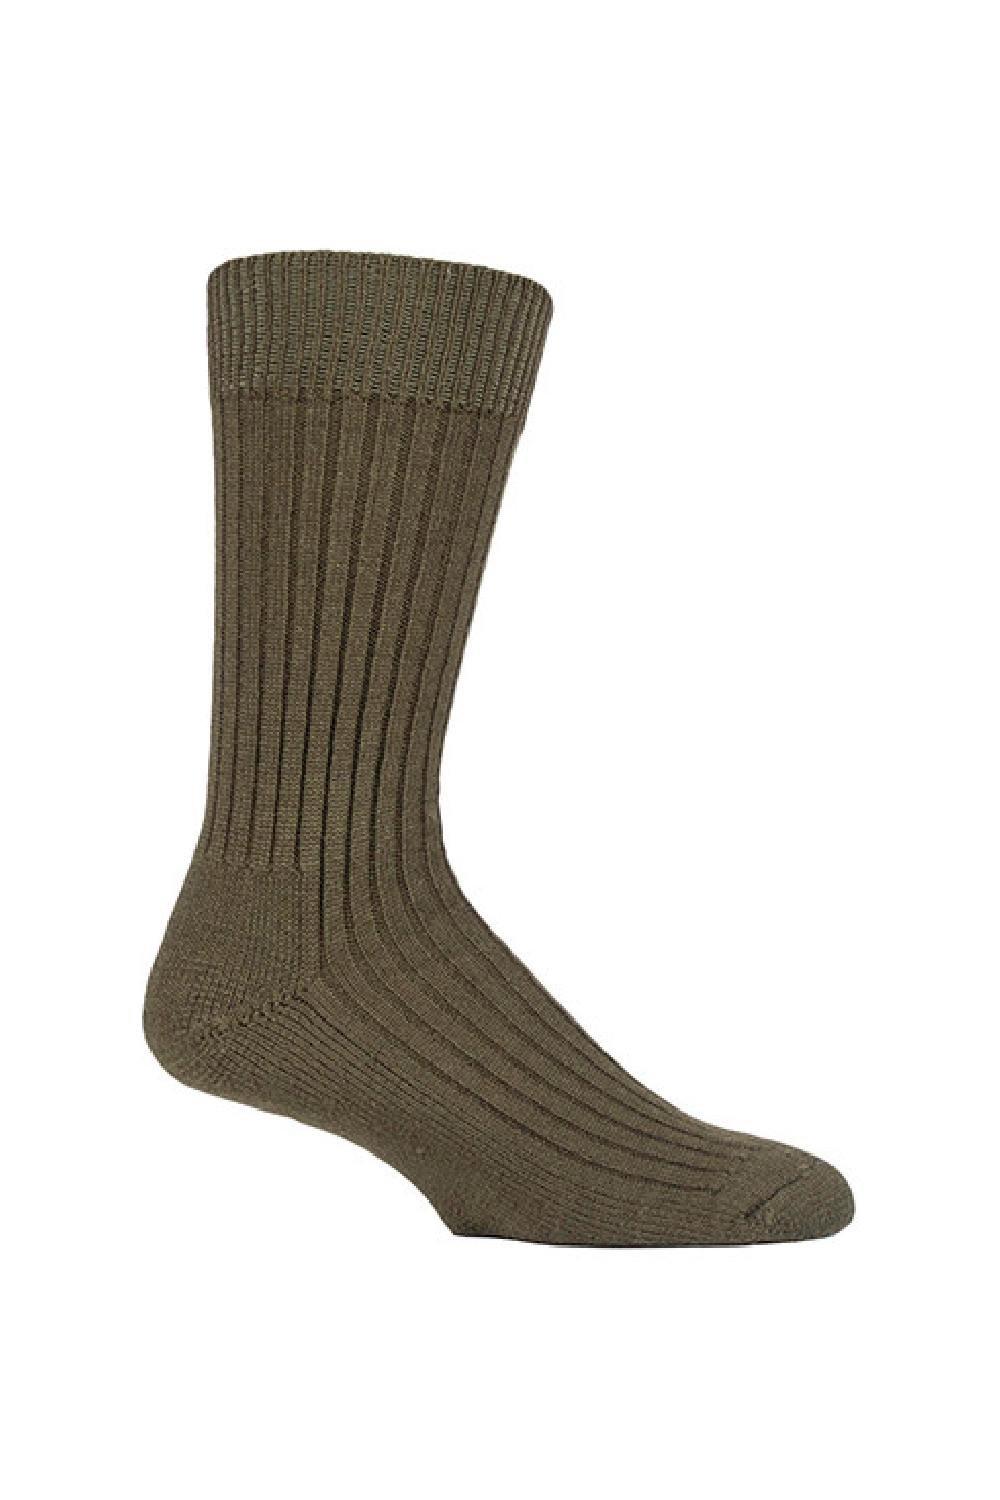 Wool Military Action Army Style Outdoor Walking Socks for Boots